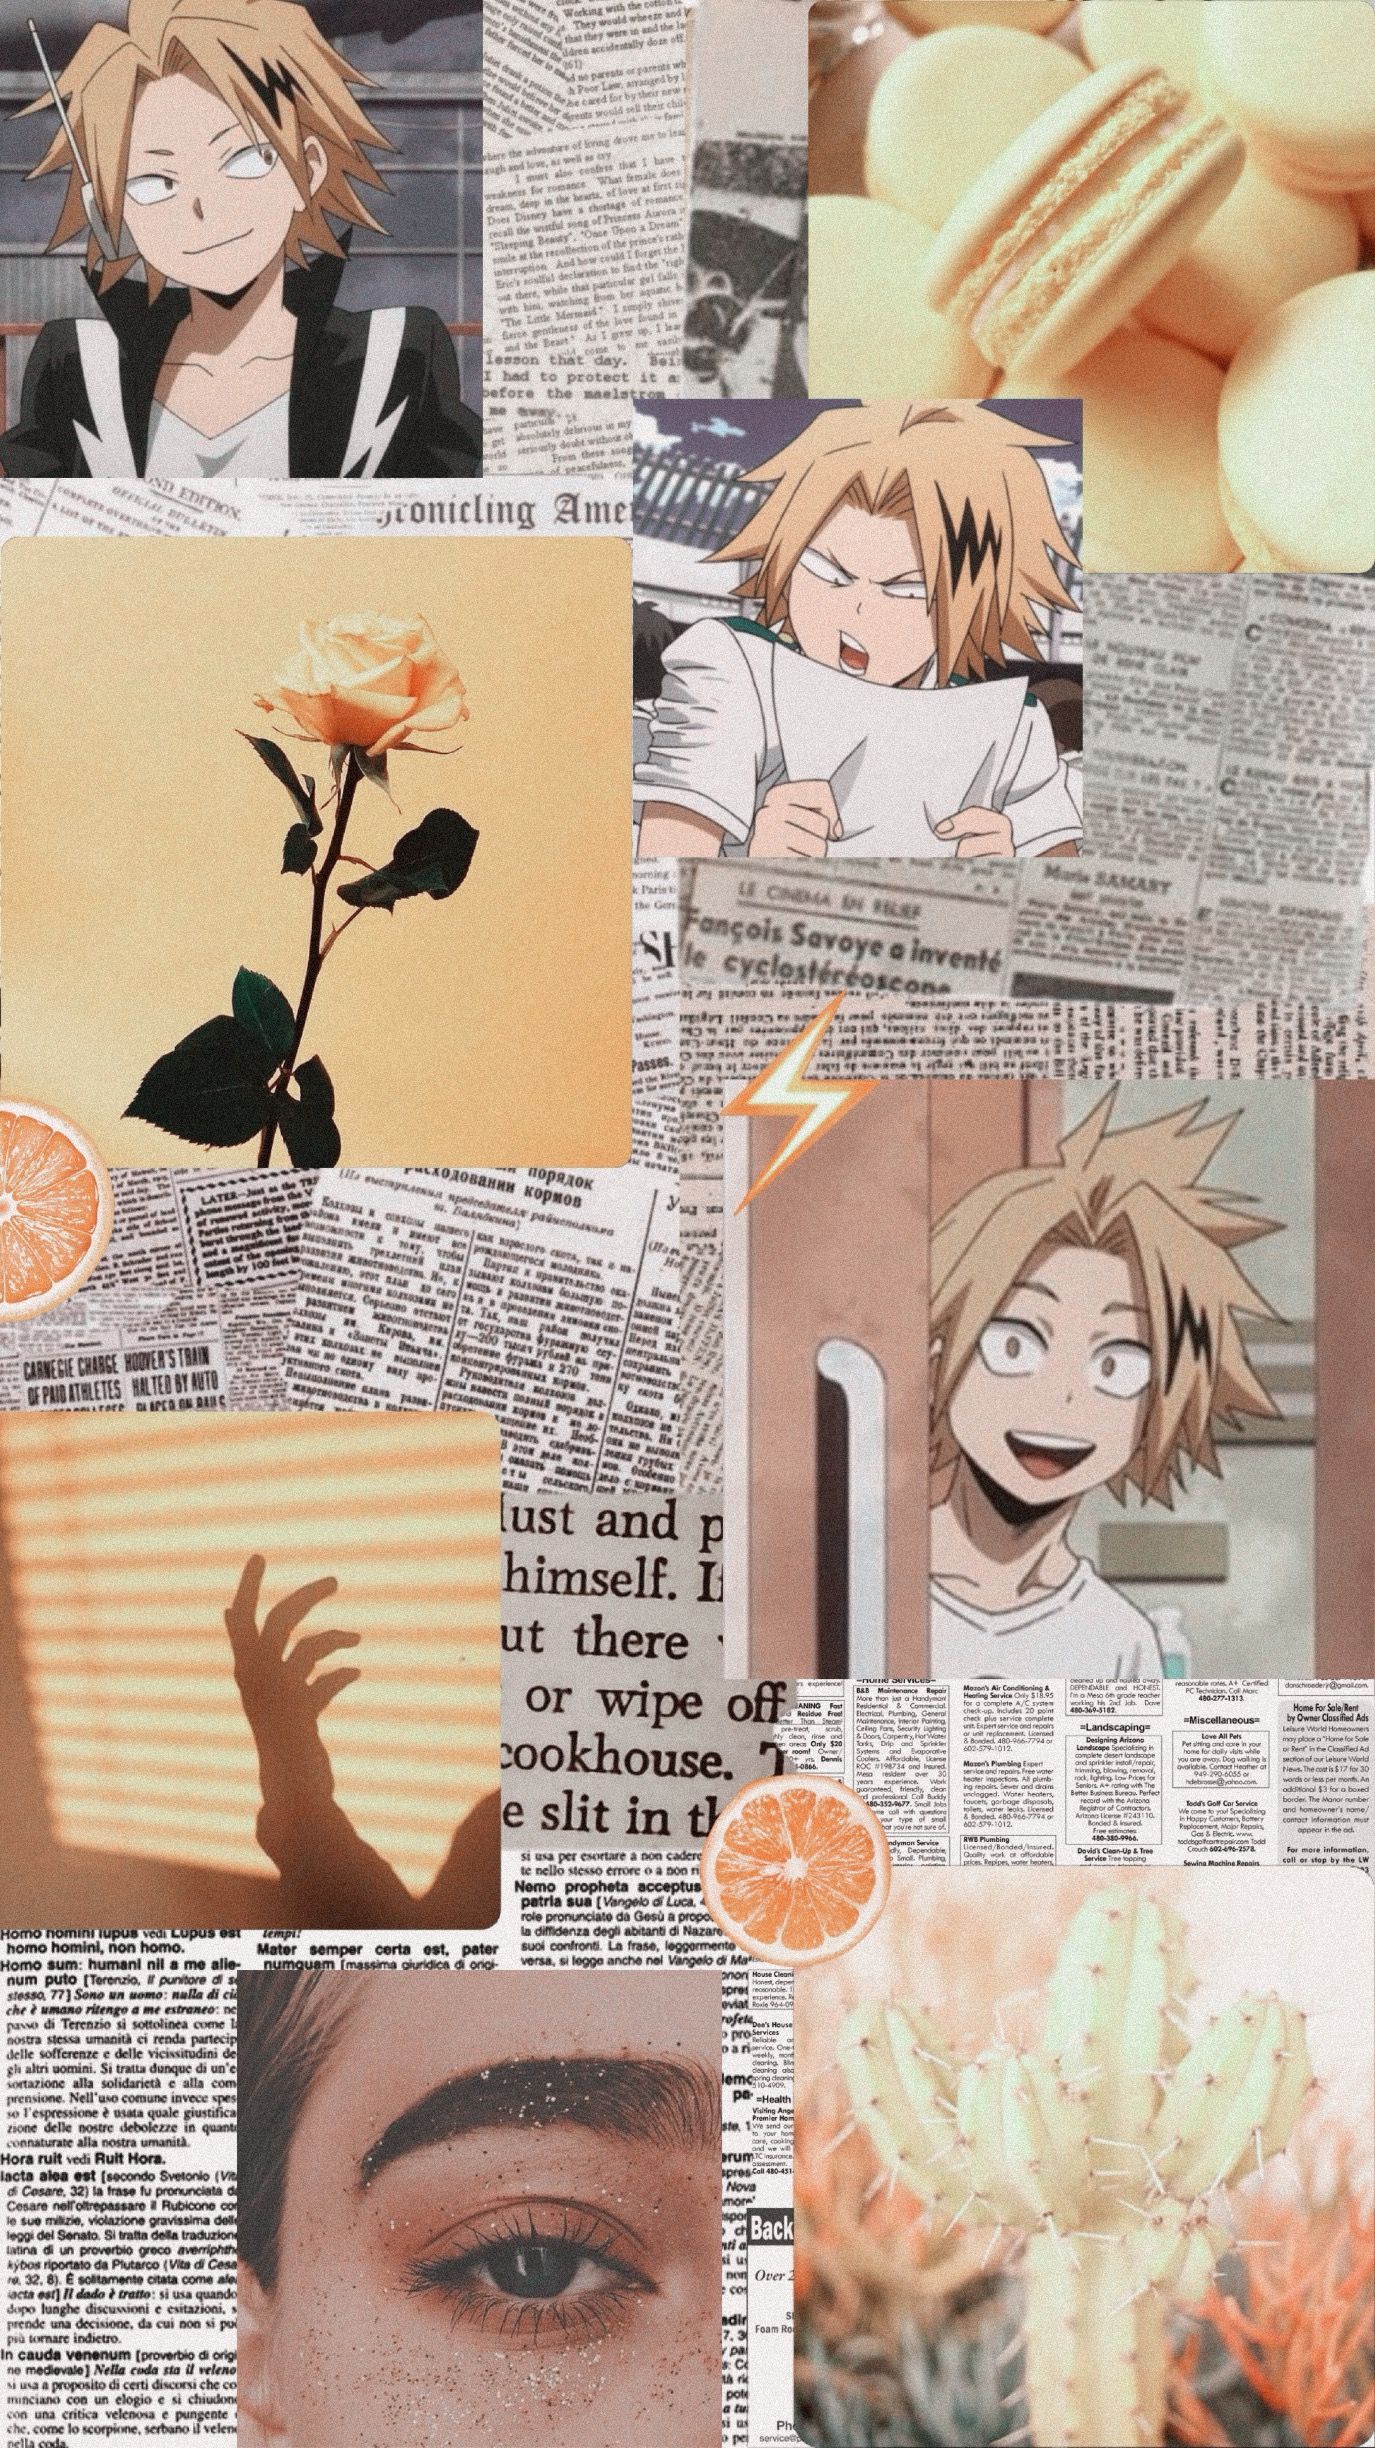 Collage of anime characters, orange slices, and newspaper pages - Denki Kaminari